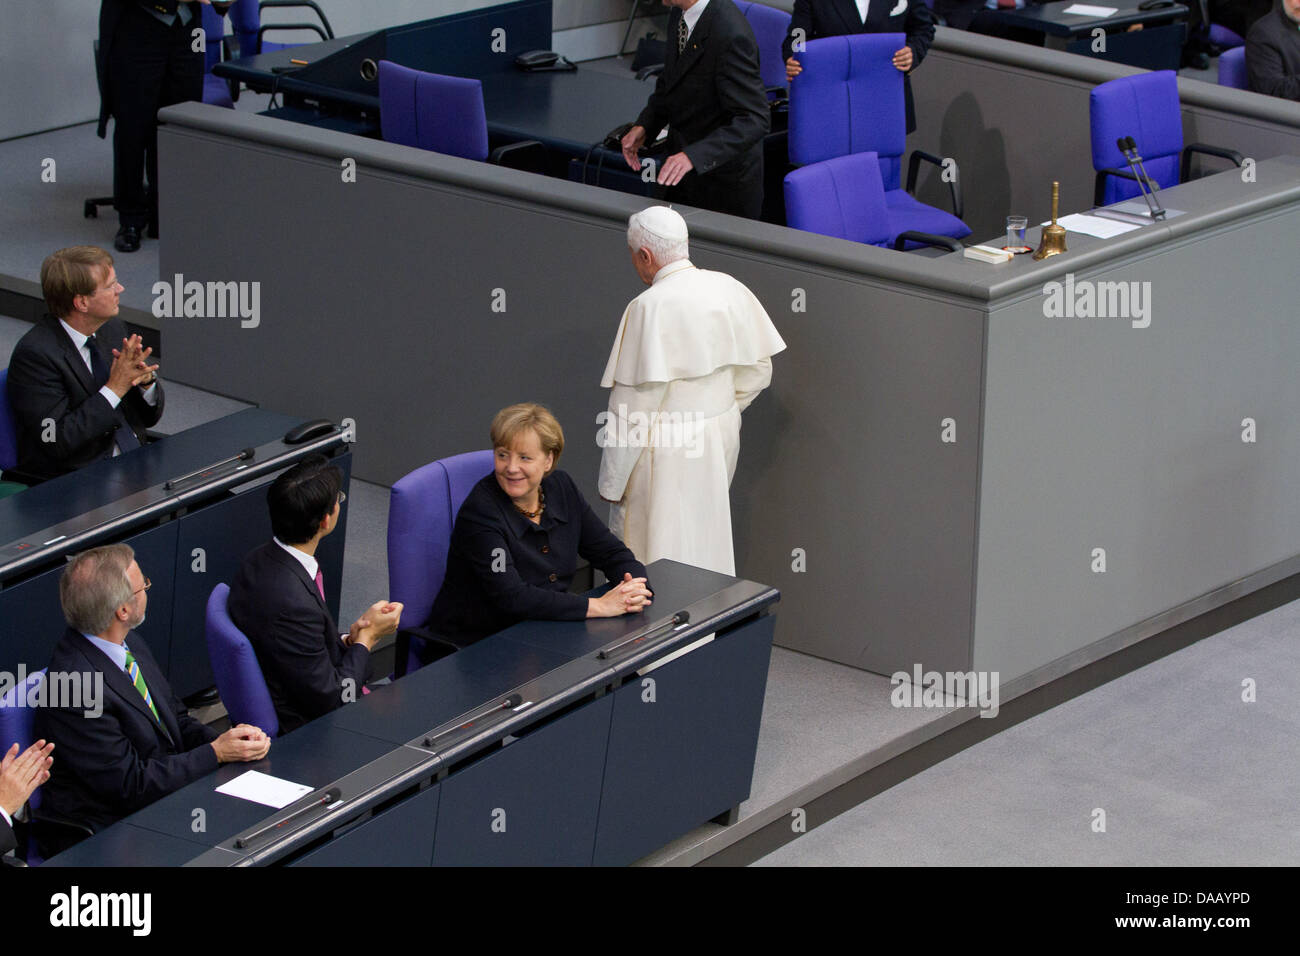 Pope Benedict XVI (C) takes the wrong way to the speakers podium to deliver his speech in the Bundestag, Germany's parliament, in Berlin, Germany, 22 September, 2011. The head of the Roman Catholic Church is visiting Germany from 22-25 September 2011. At left is German Chancellor Angela Merkel. Foto: Herbert Knosowski dpa/lbn Stock Photo